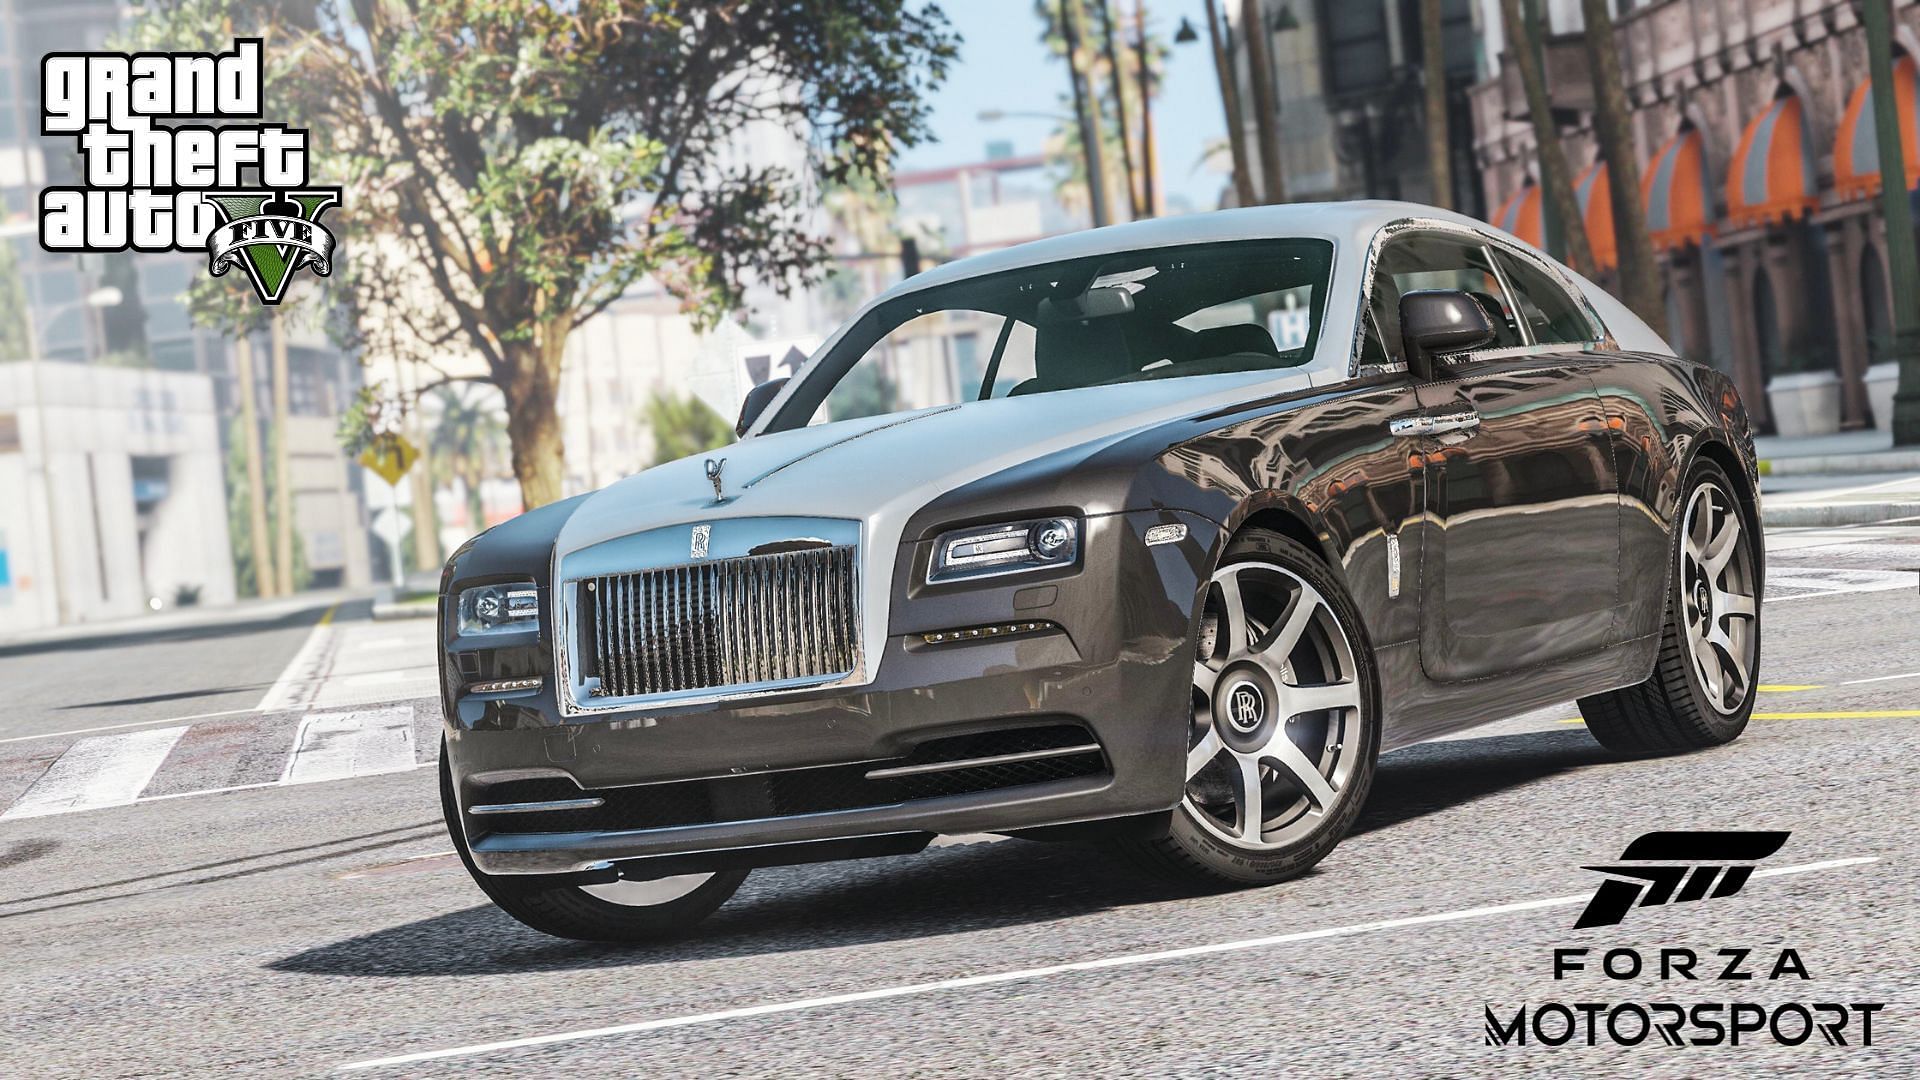 The Rolls-Royce Wraith from Forza Motorsport in GTA 5 (Image via GTA5-Mods/A.N.R.T)